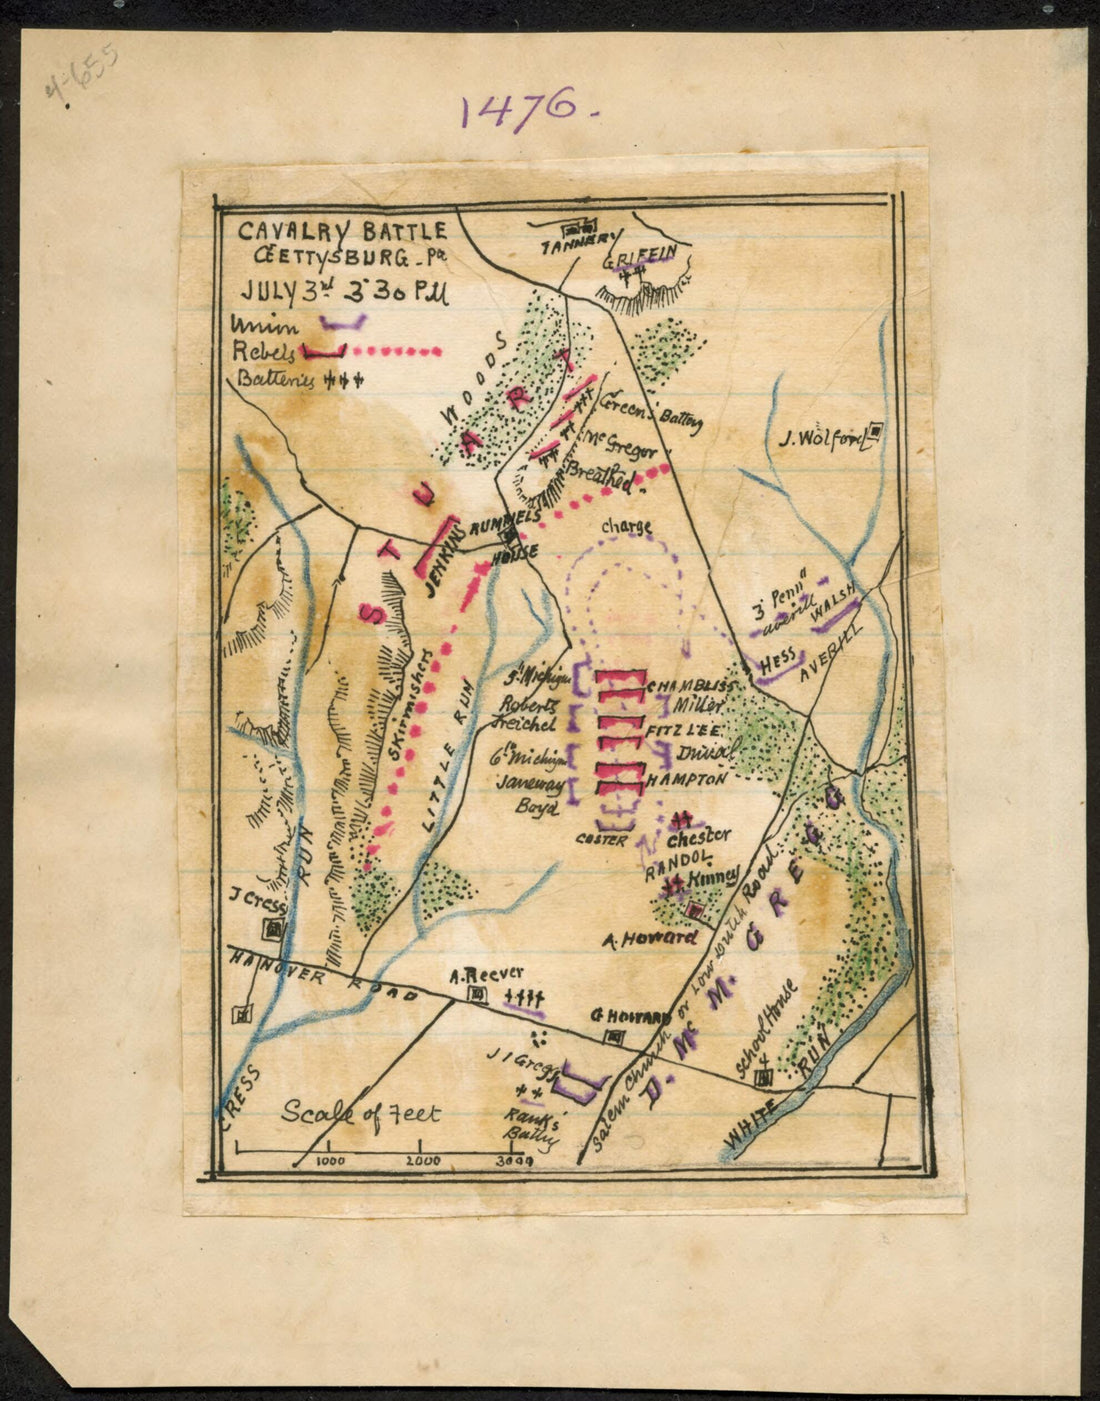 This old map of Cavalry Battle, Gettysburg, Pennsylvania July 3rd 3:30 P.m from 07-03 was created by Robert Knox Sneden in 07-03